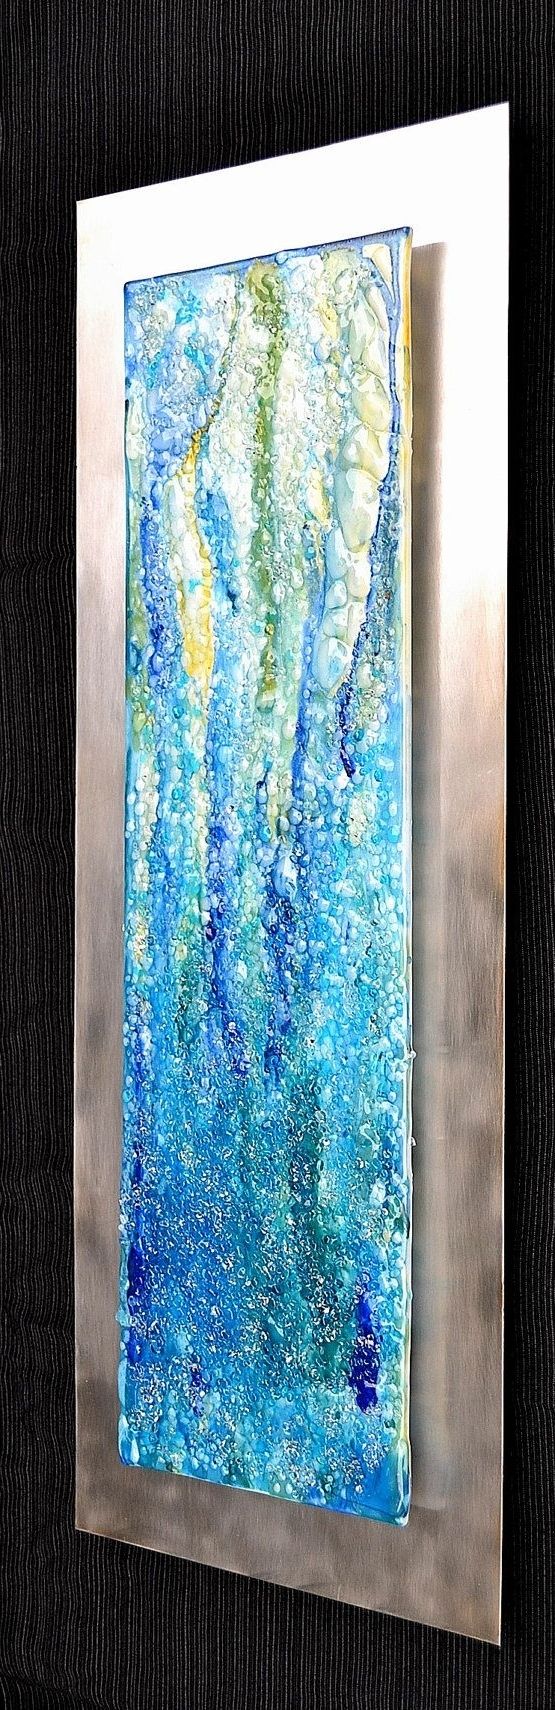 Famous Waterfall – Modern Fused Glass Wall Hanging Art On Stainless Steel Inside Fused Glass Wall Art Devon (View 1 of 15)